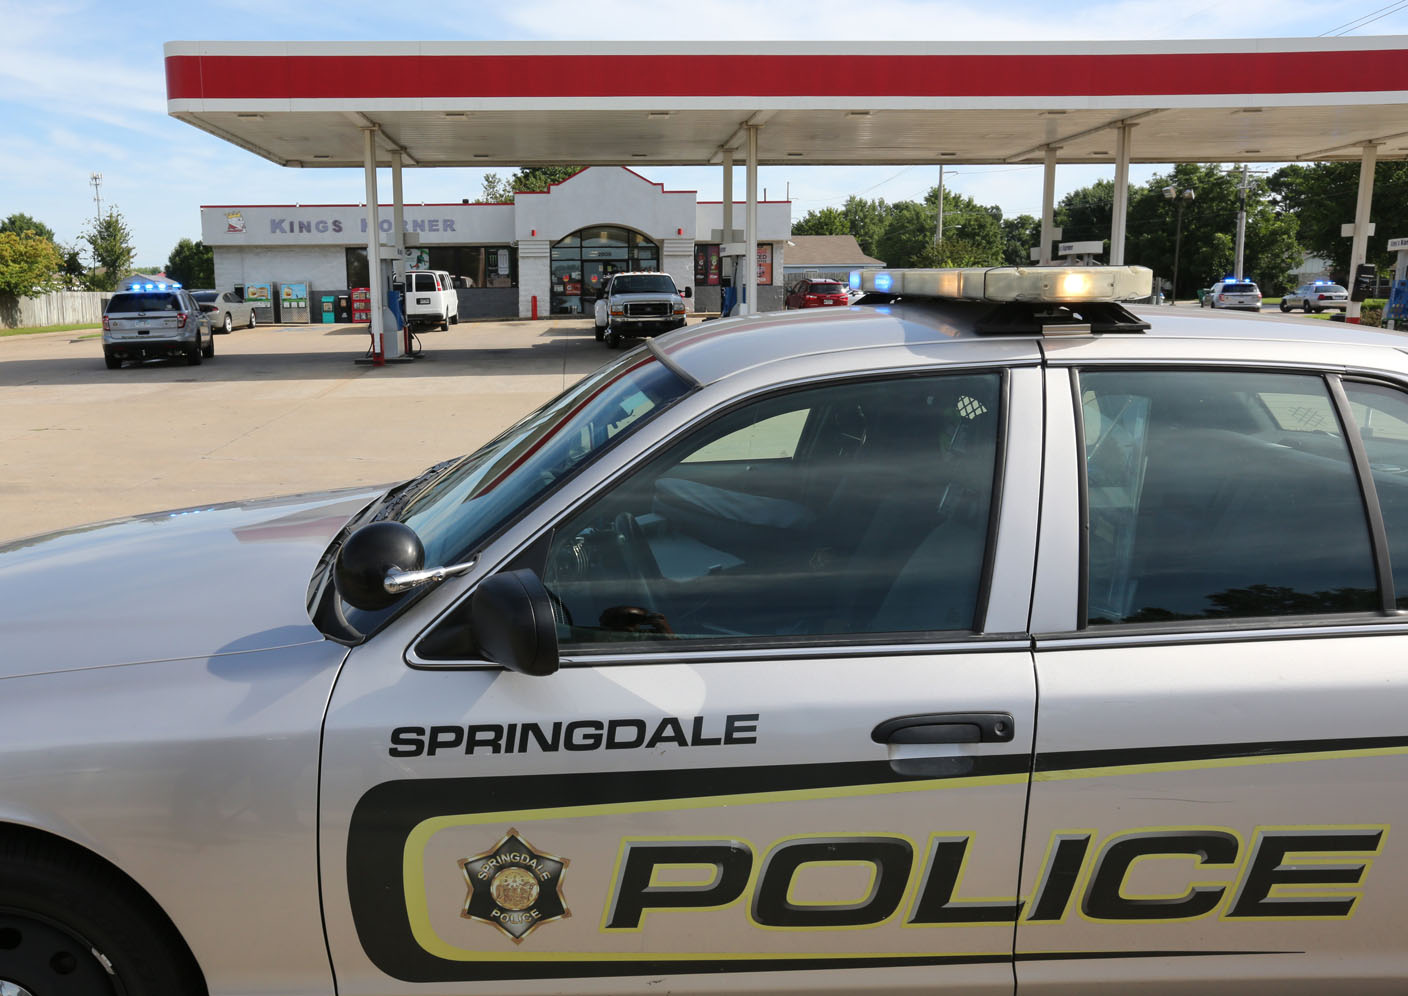 Springdale convenience store owners cited for allowing gambling